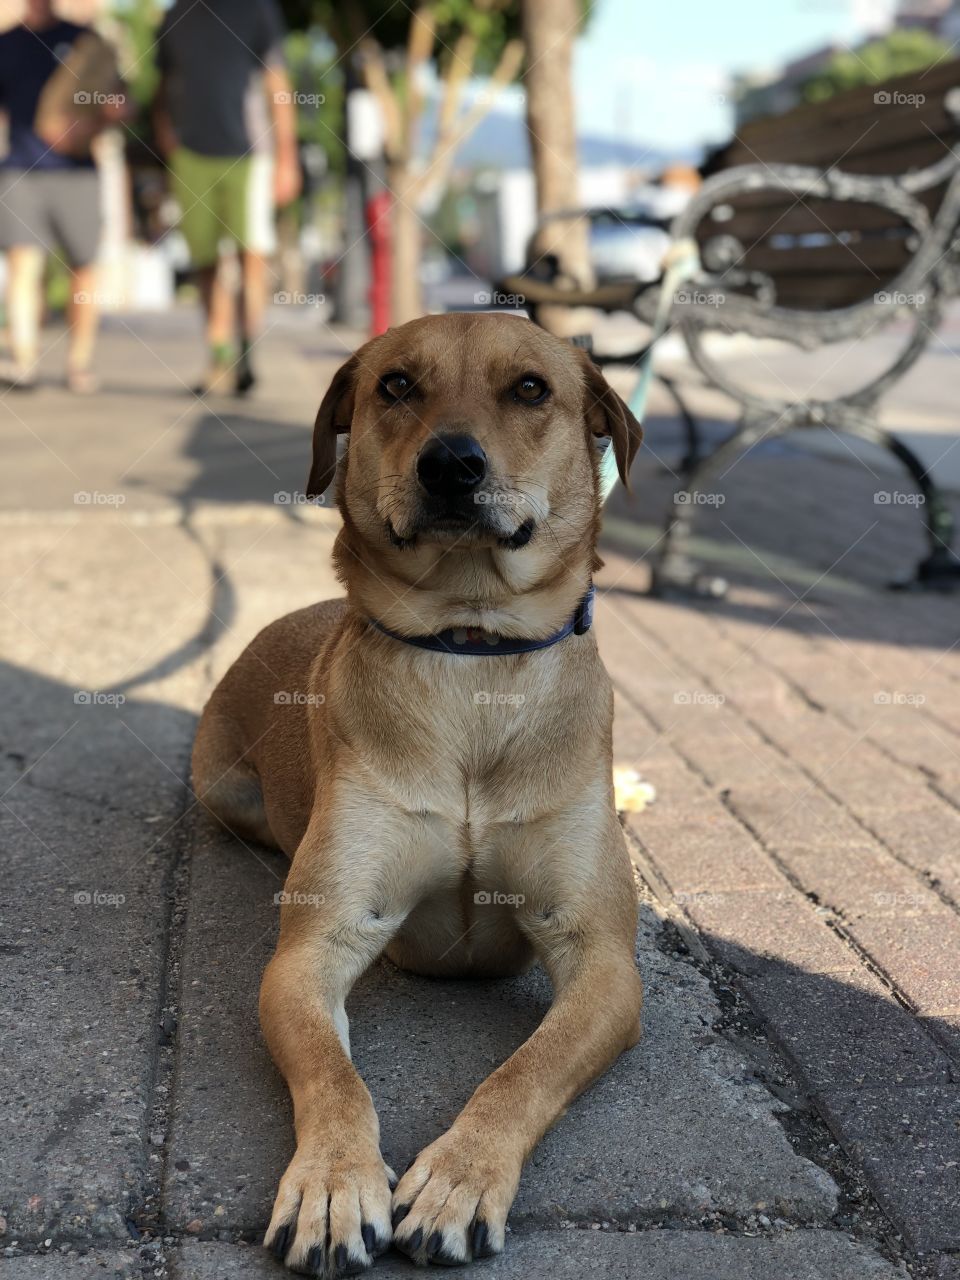 Dog relaxing on a cool sidewalk 